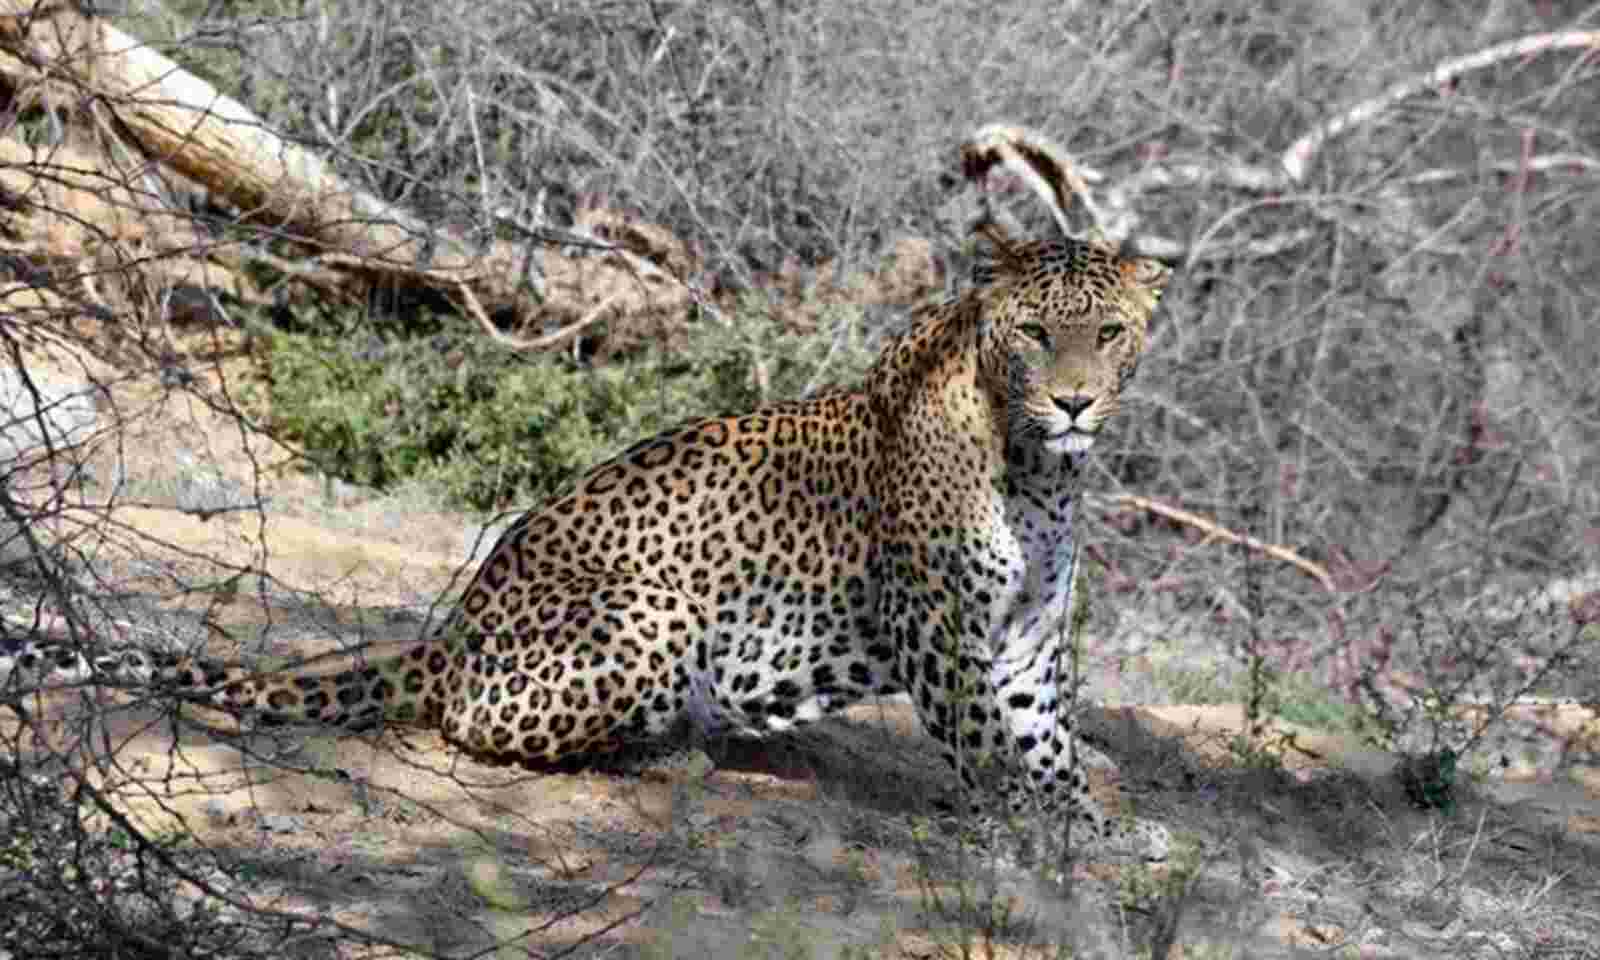 Injured leopard recouping after treatment at Tamil Nadu tiger reserve